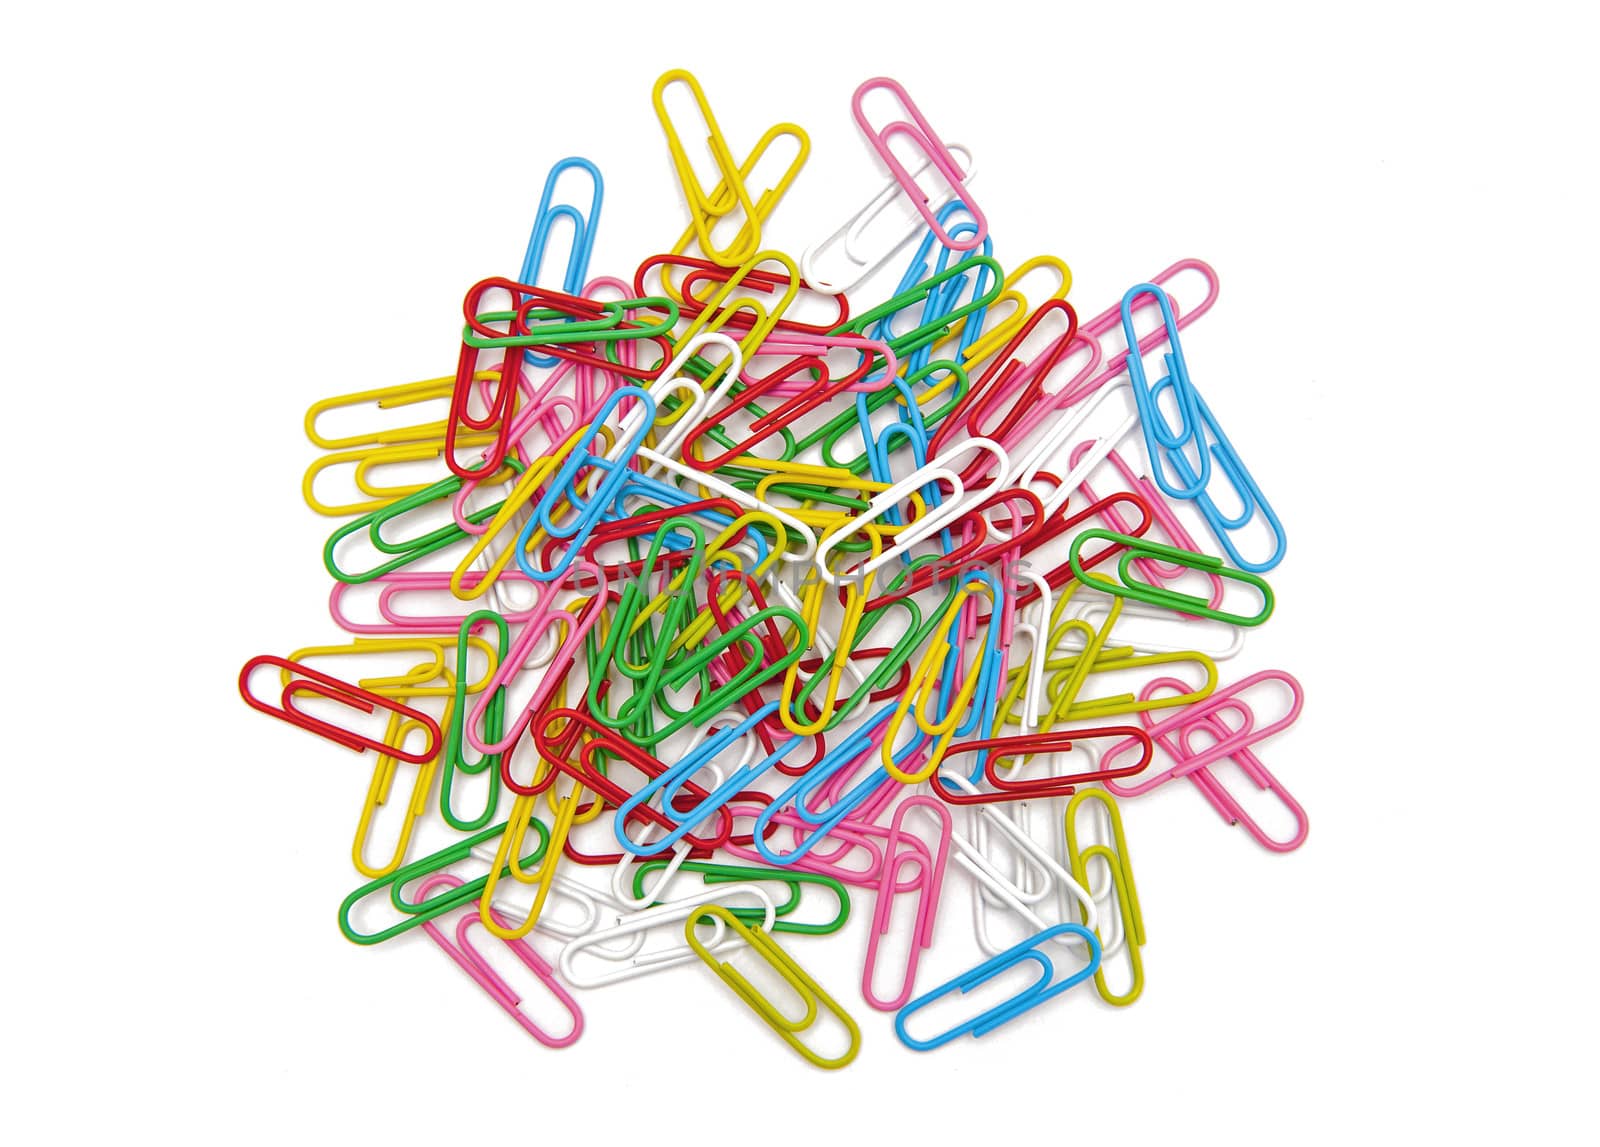 Paper clips by Yaurinko